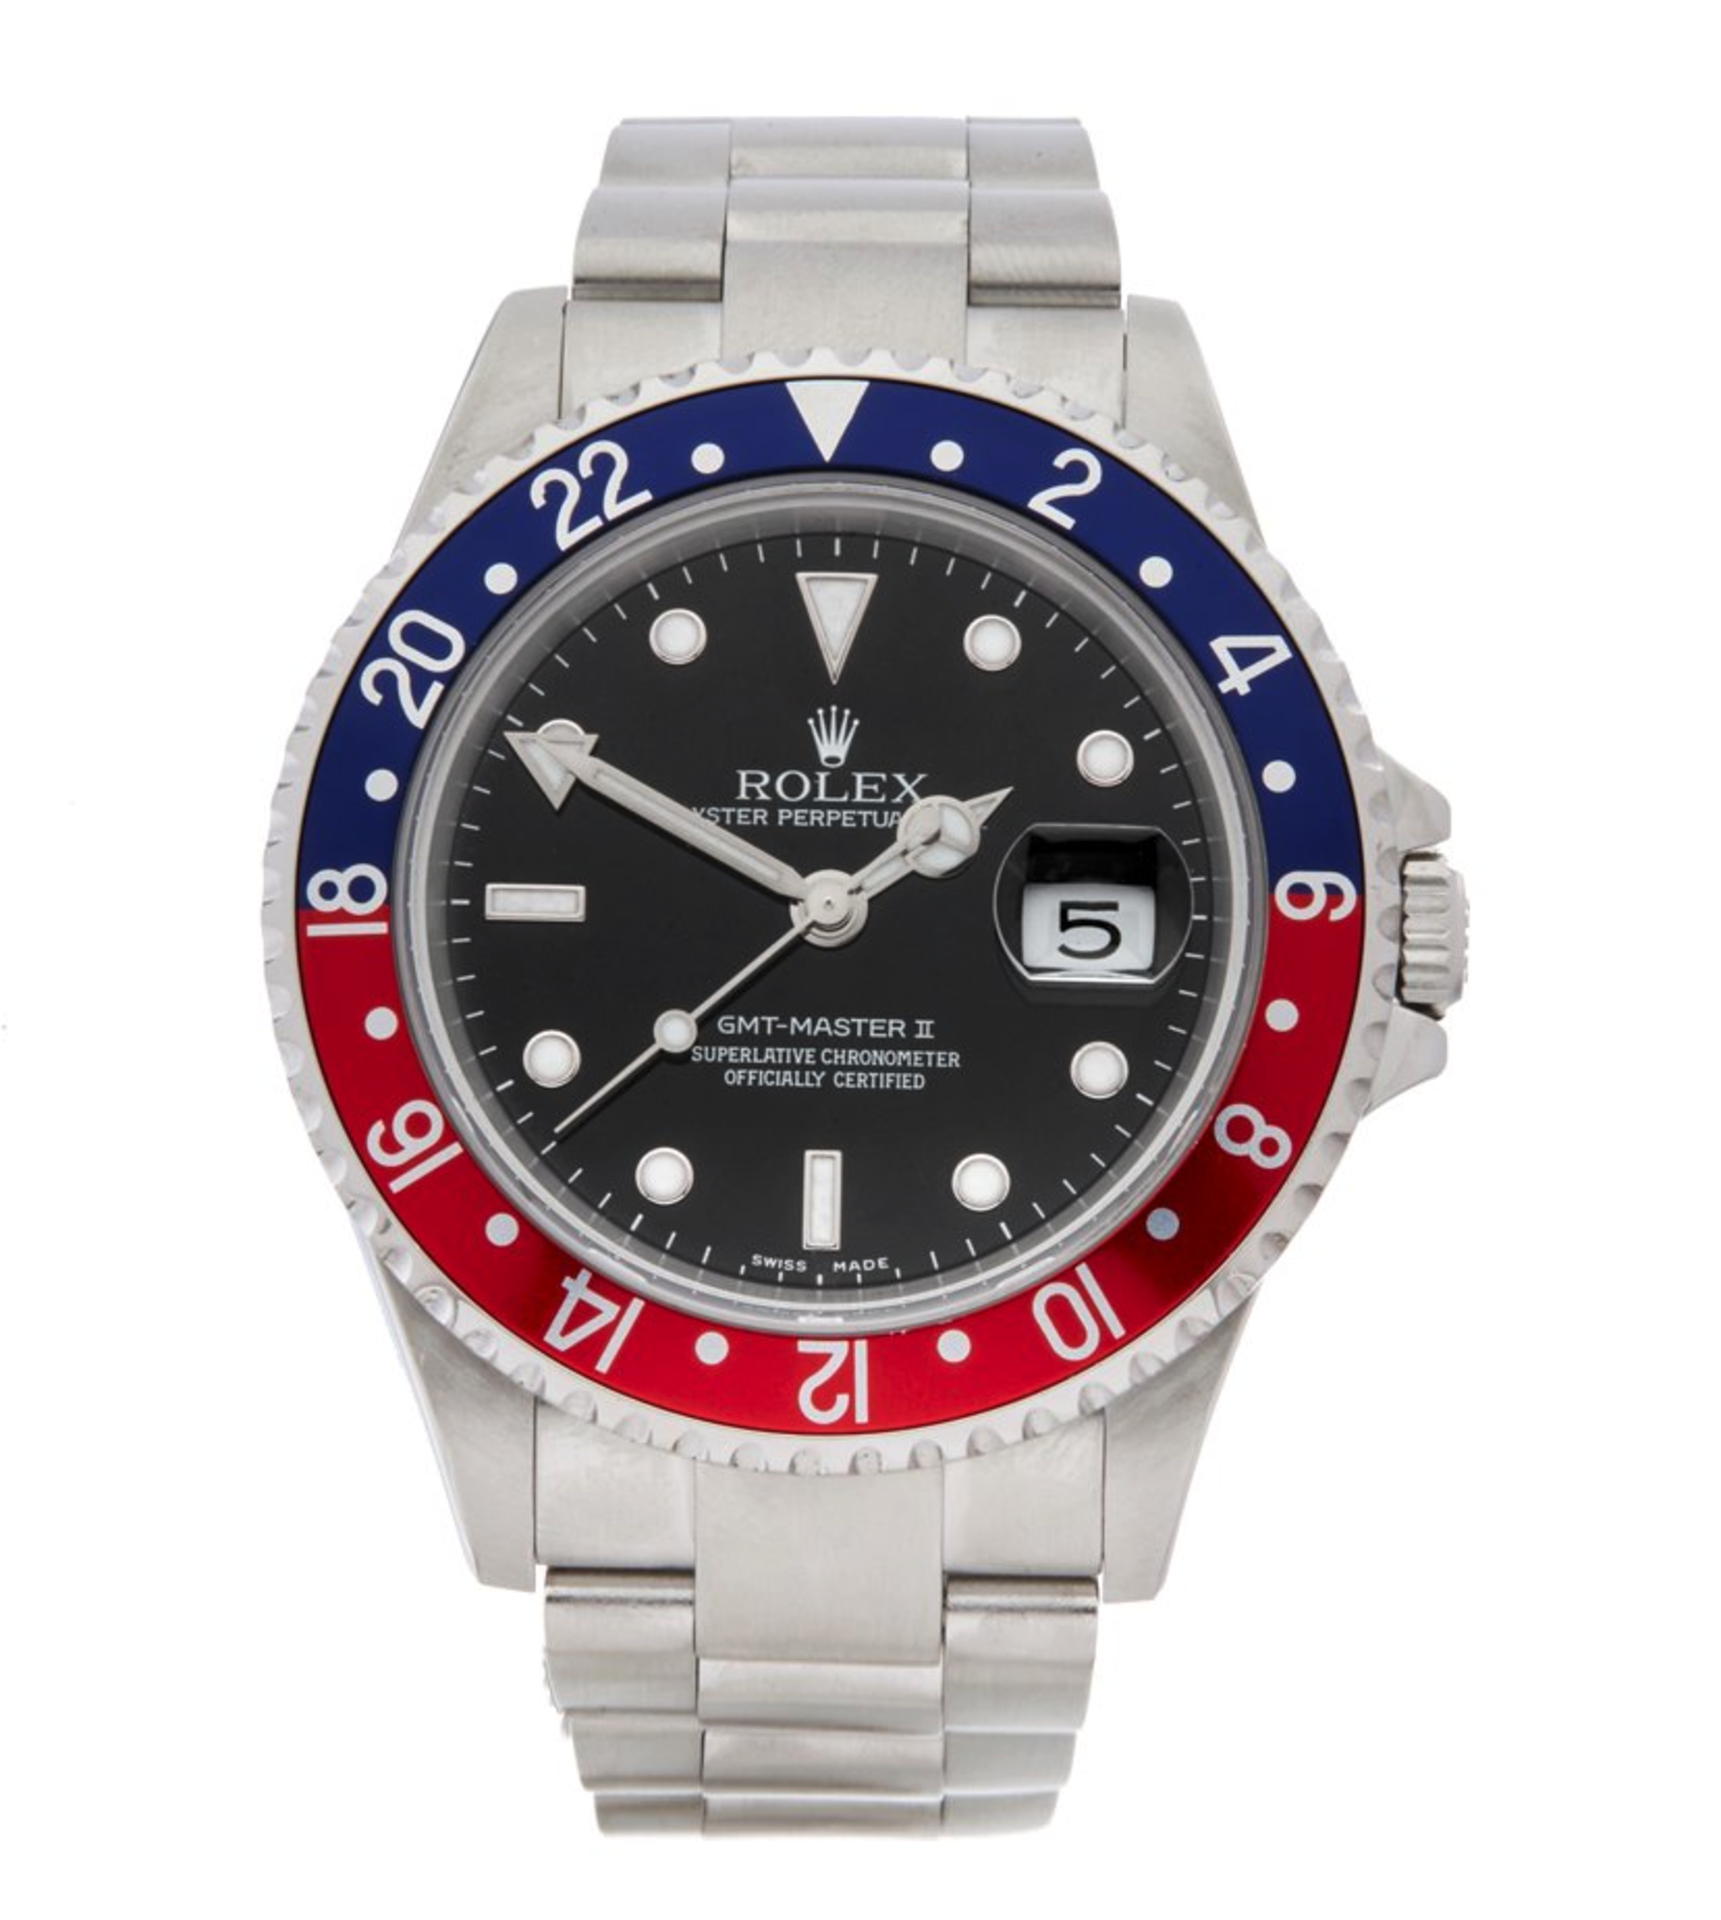 Rolex GMT-Master II Pepsi Stainless Steel - 16710 - Image 3 of 8